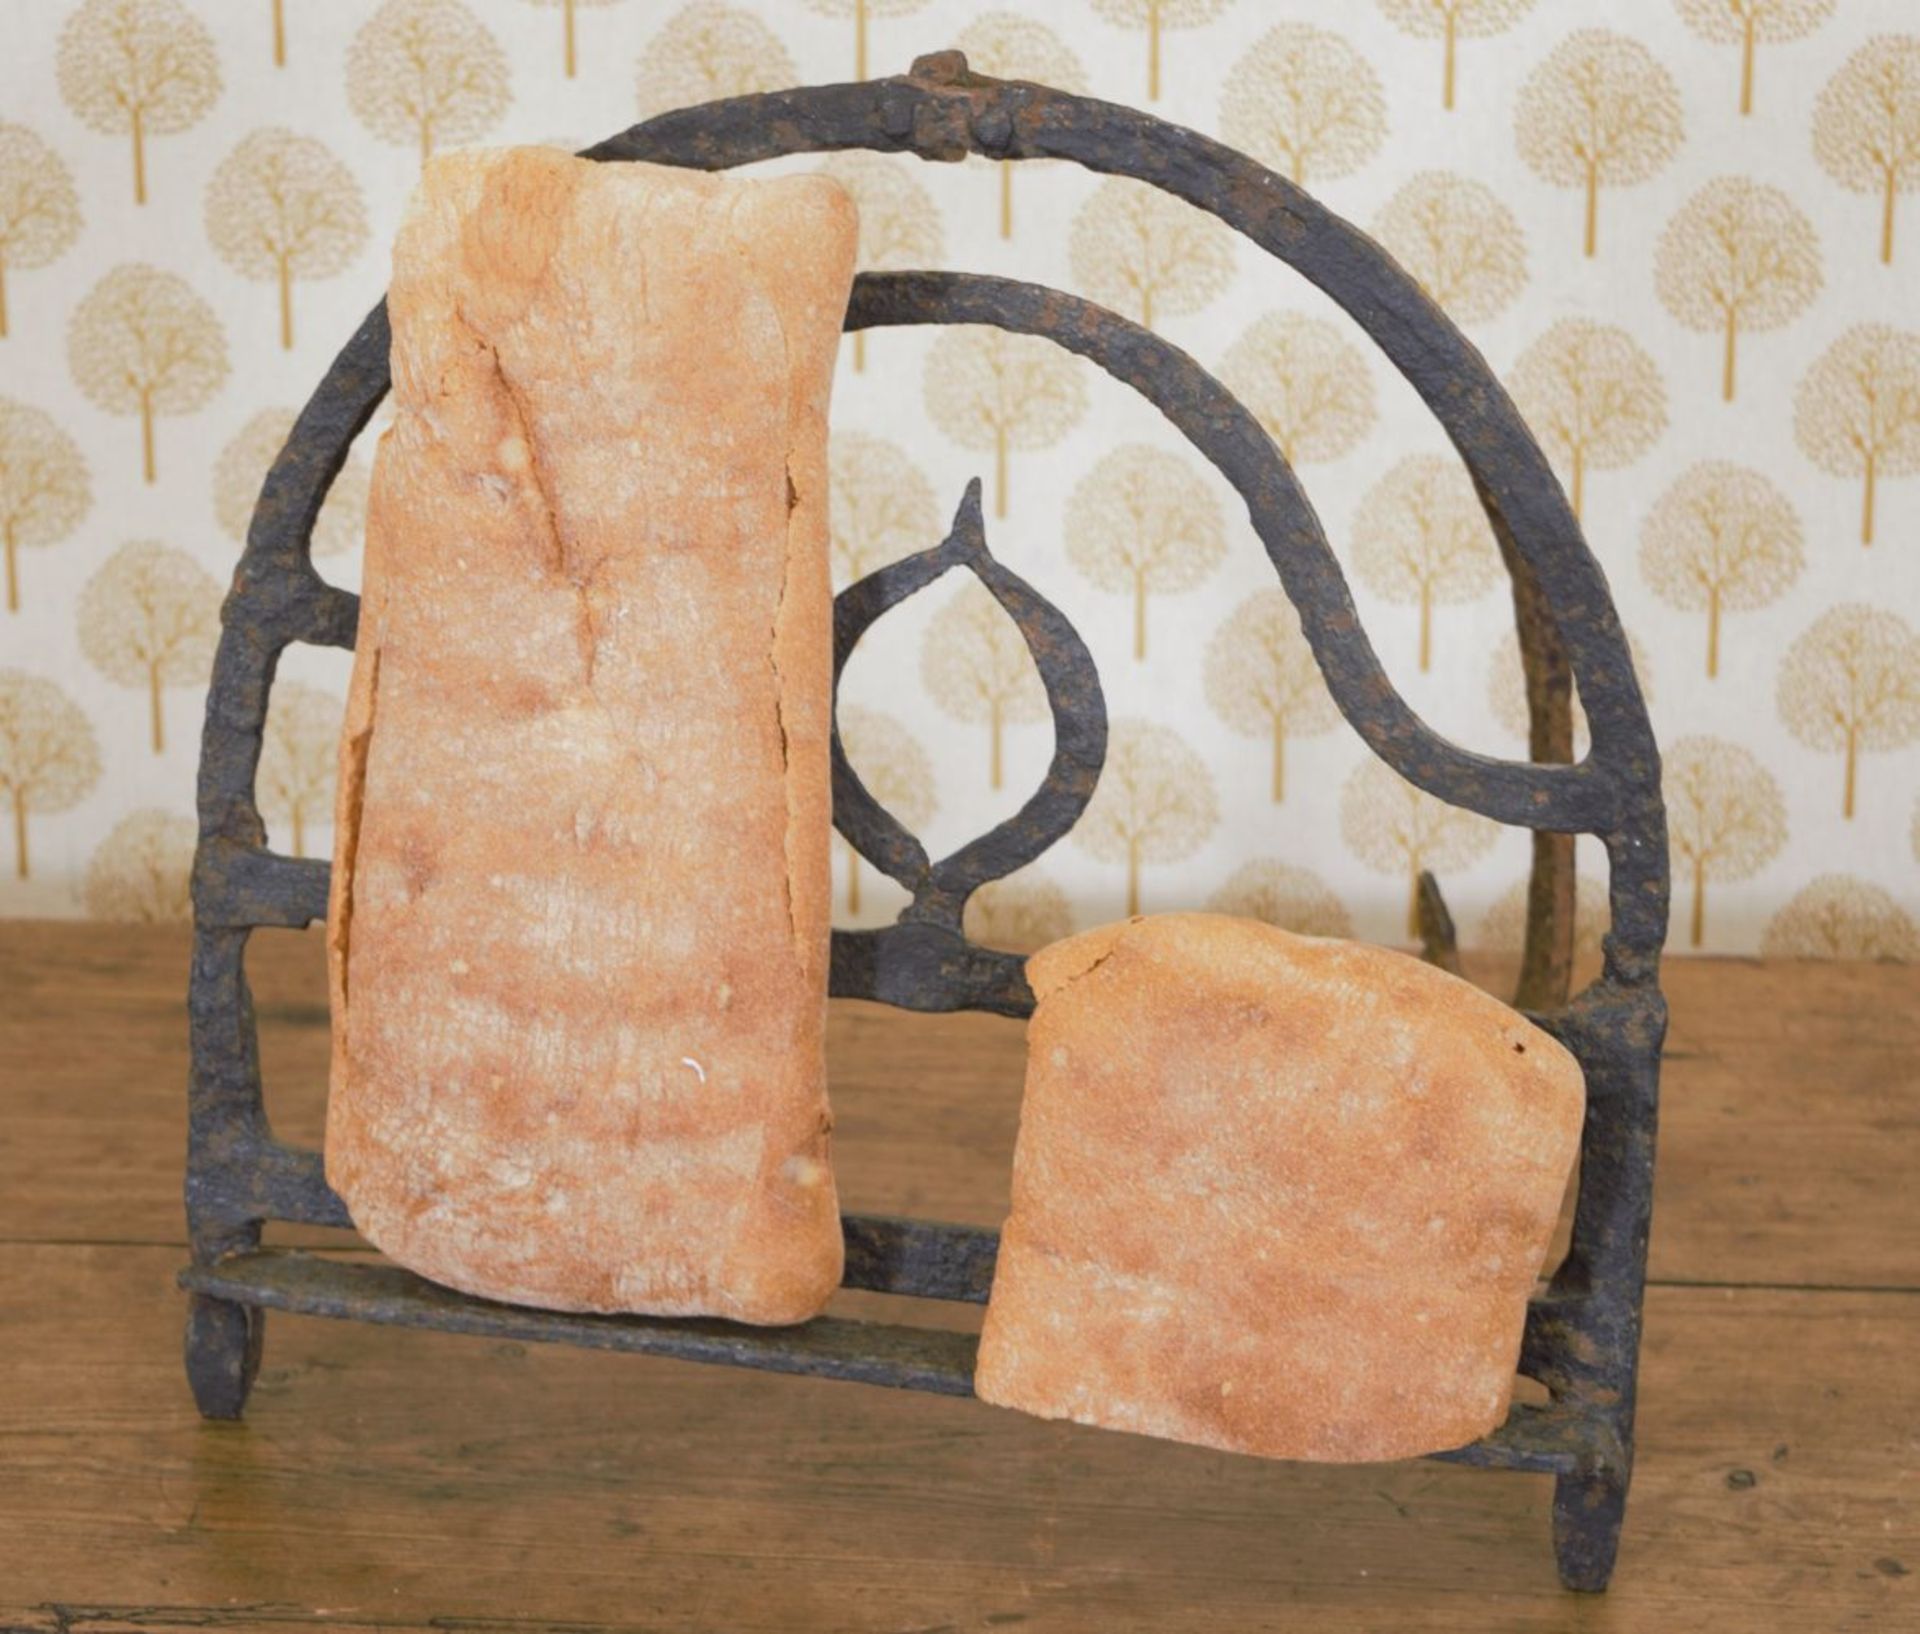 EARLY 19TH-CENTURY FORGED IRON BREAD HARDENING STAND - Image 2 of 3